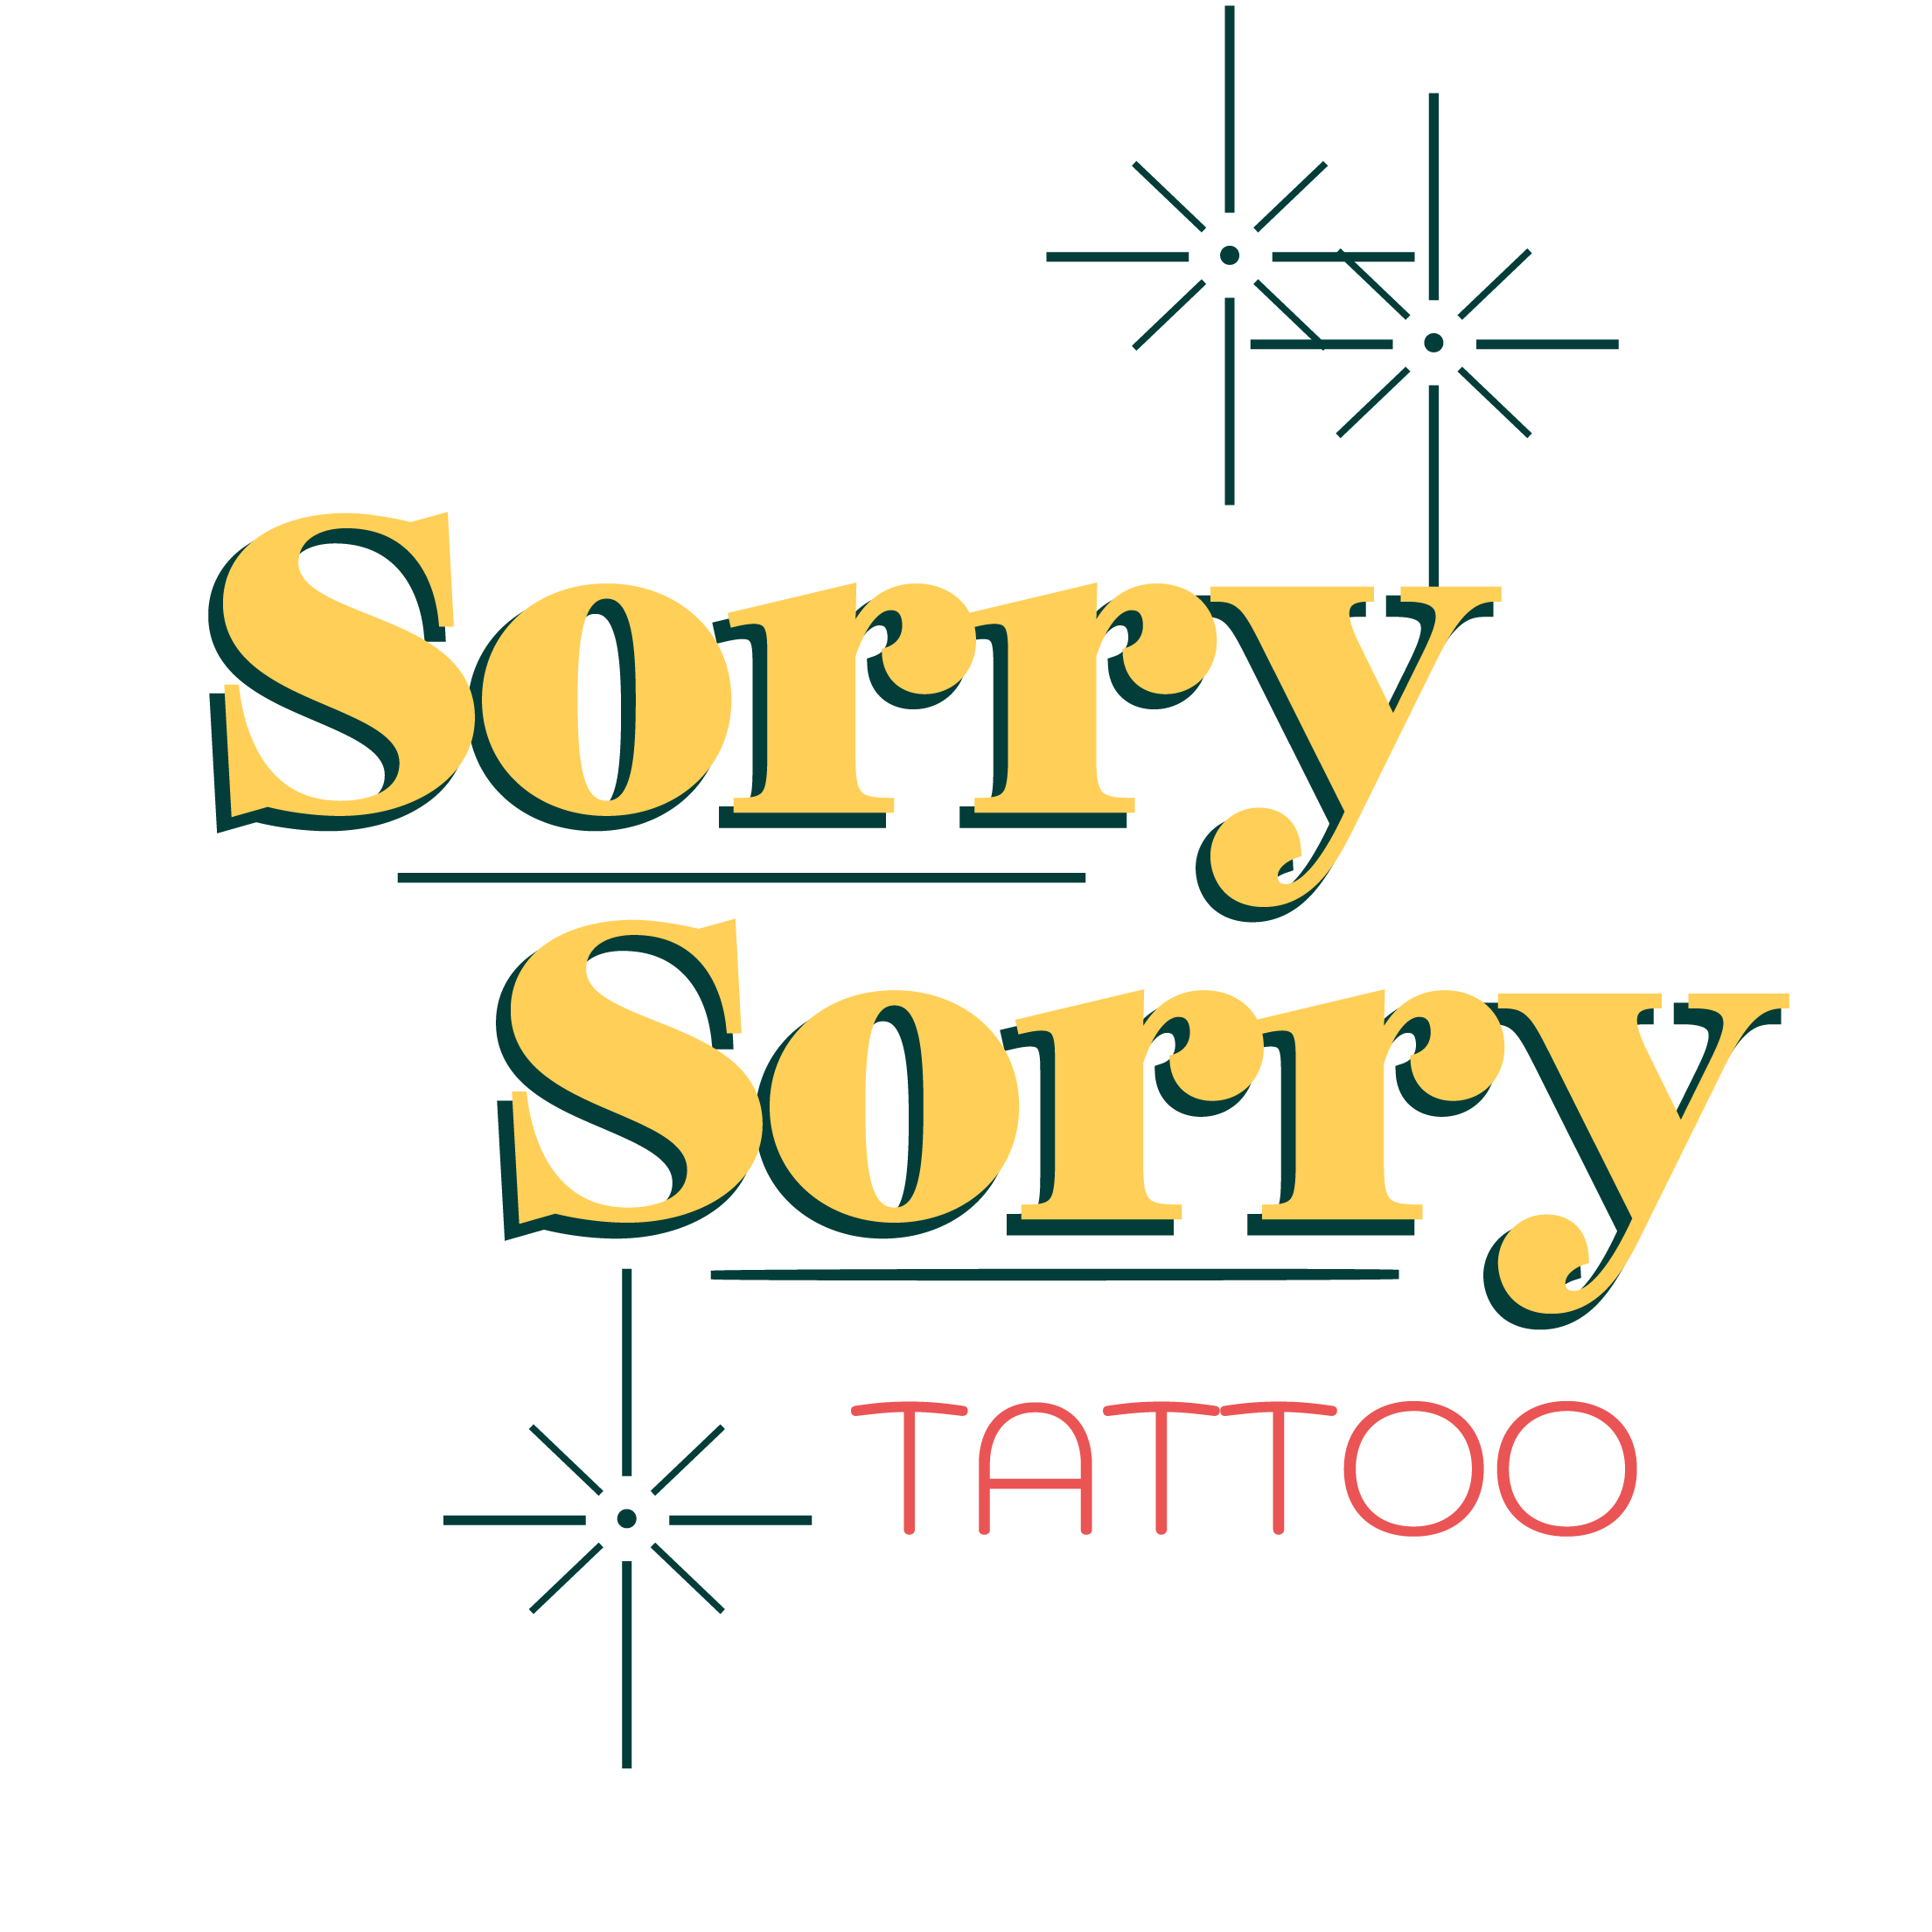 peebeautysalon  I dont want another sorry  I particularly like this  tattoo art because it resonates with one of my wishes for May I dont want  to receive another sorry or 